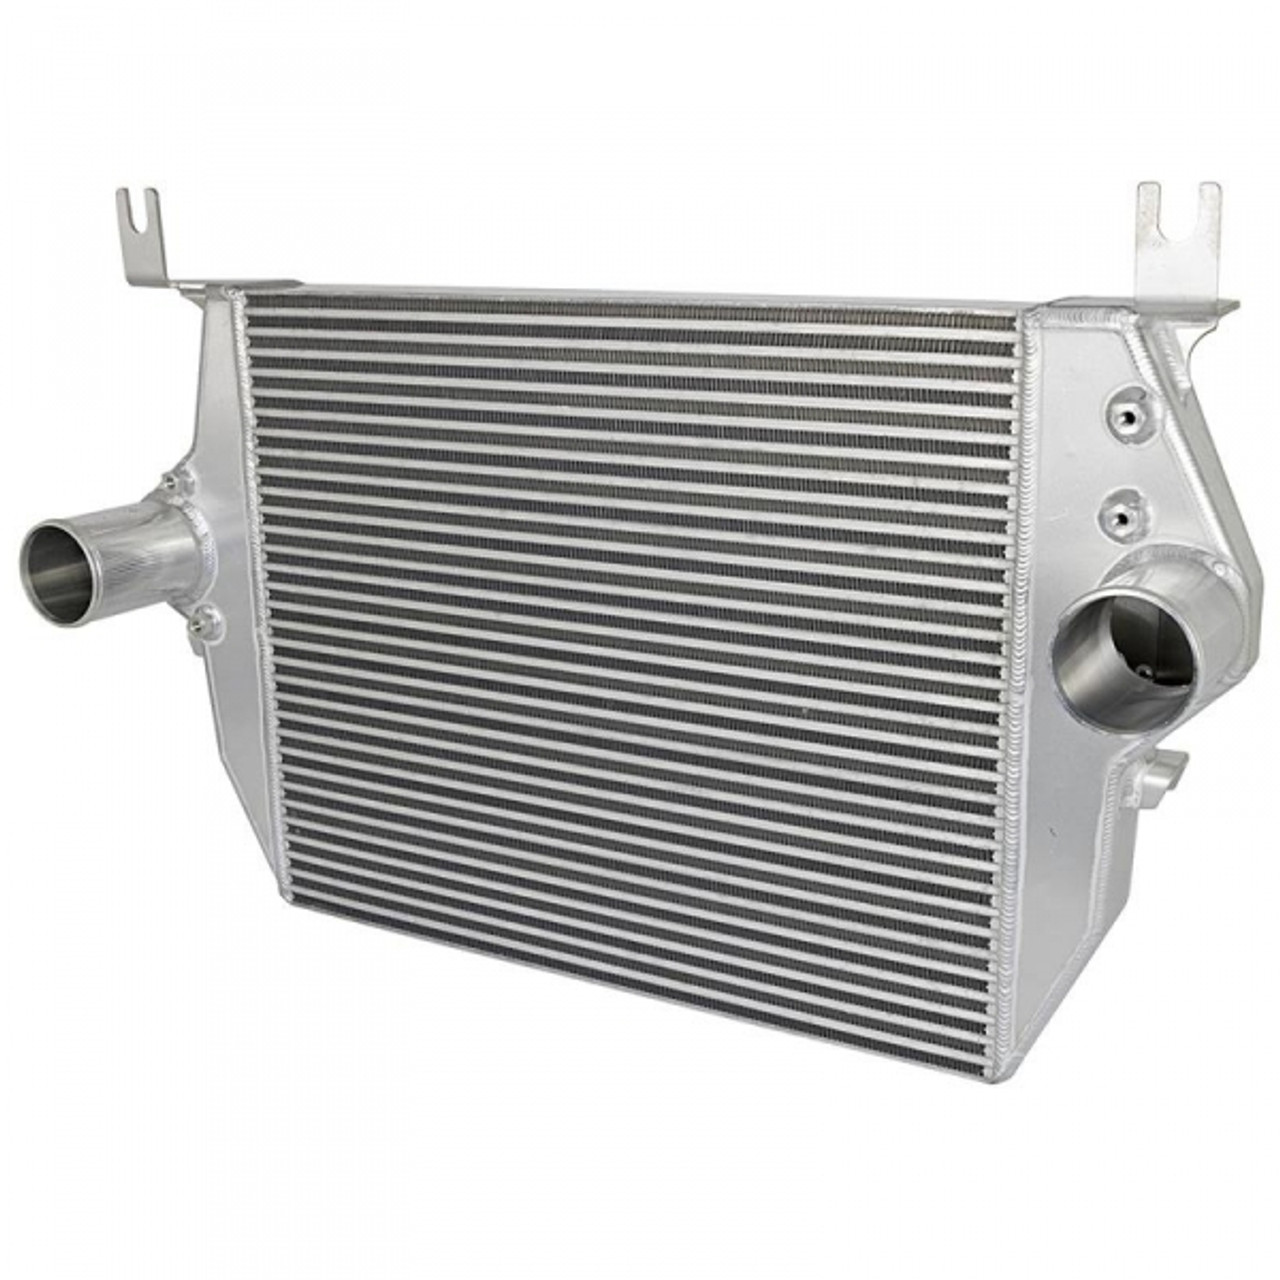 AFE Bladerunner GT Series Intercooler with Tubes 2003 to 2007 6.0L Powerstroke (AFE46-20102-1)- Product View 1